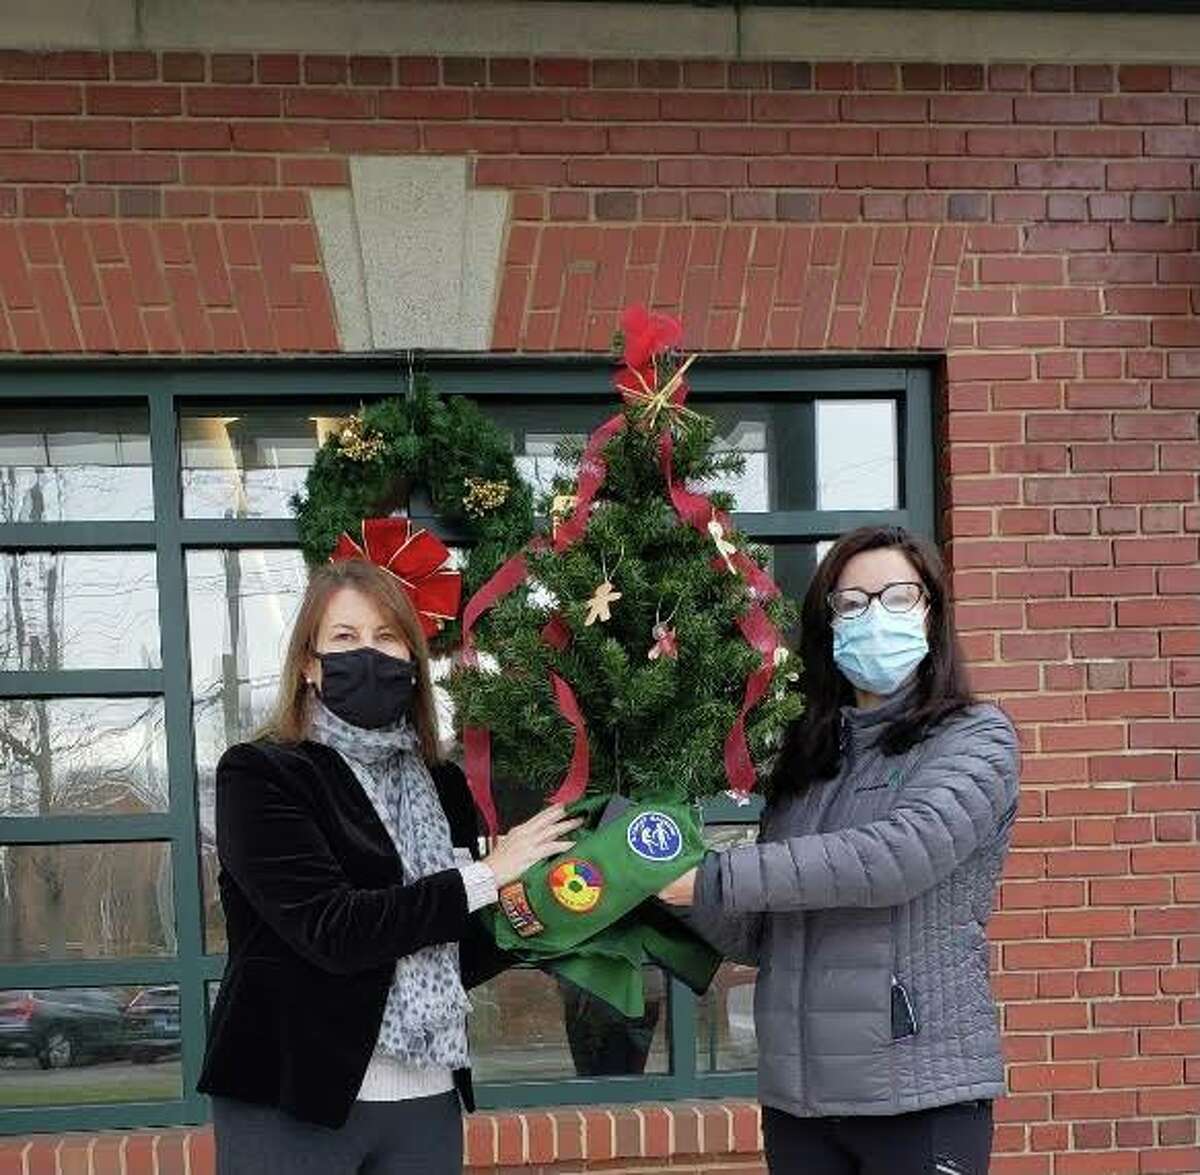 Anne Murdock, River House’s development director, left, accepts a tree decorated by Greenwich Girl Scouts from Greenwich Girl Scouts co-Service Unit Manager Kim Sushon, right.